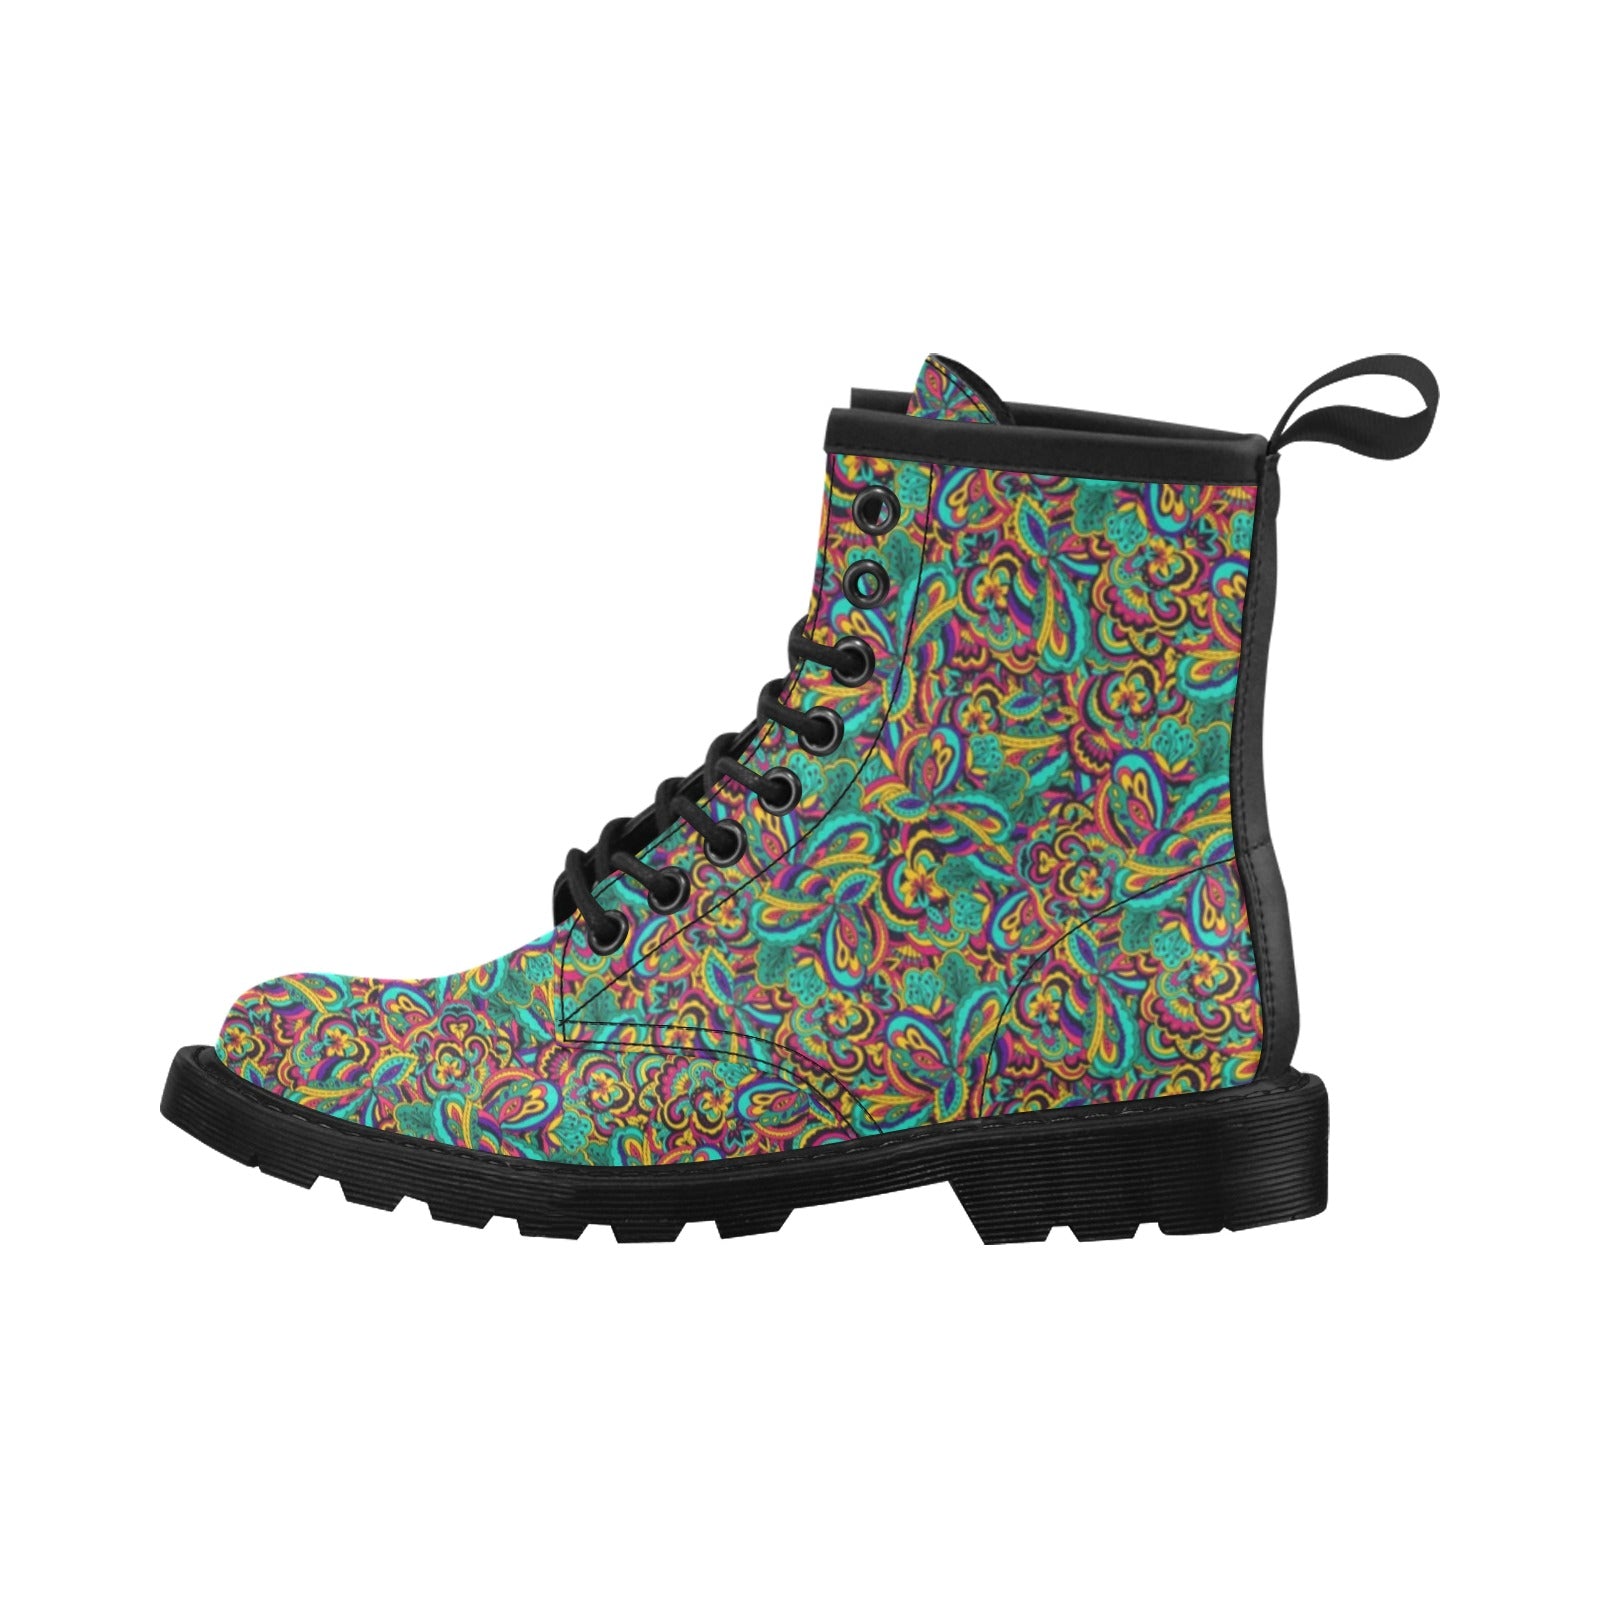 Psychedelic Trippy Floral Design Women's Boots